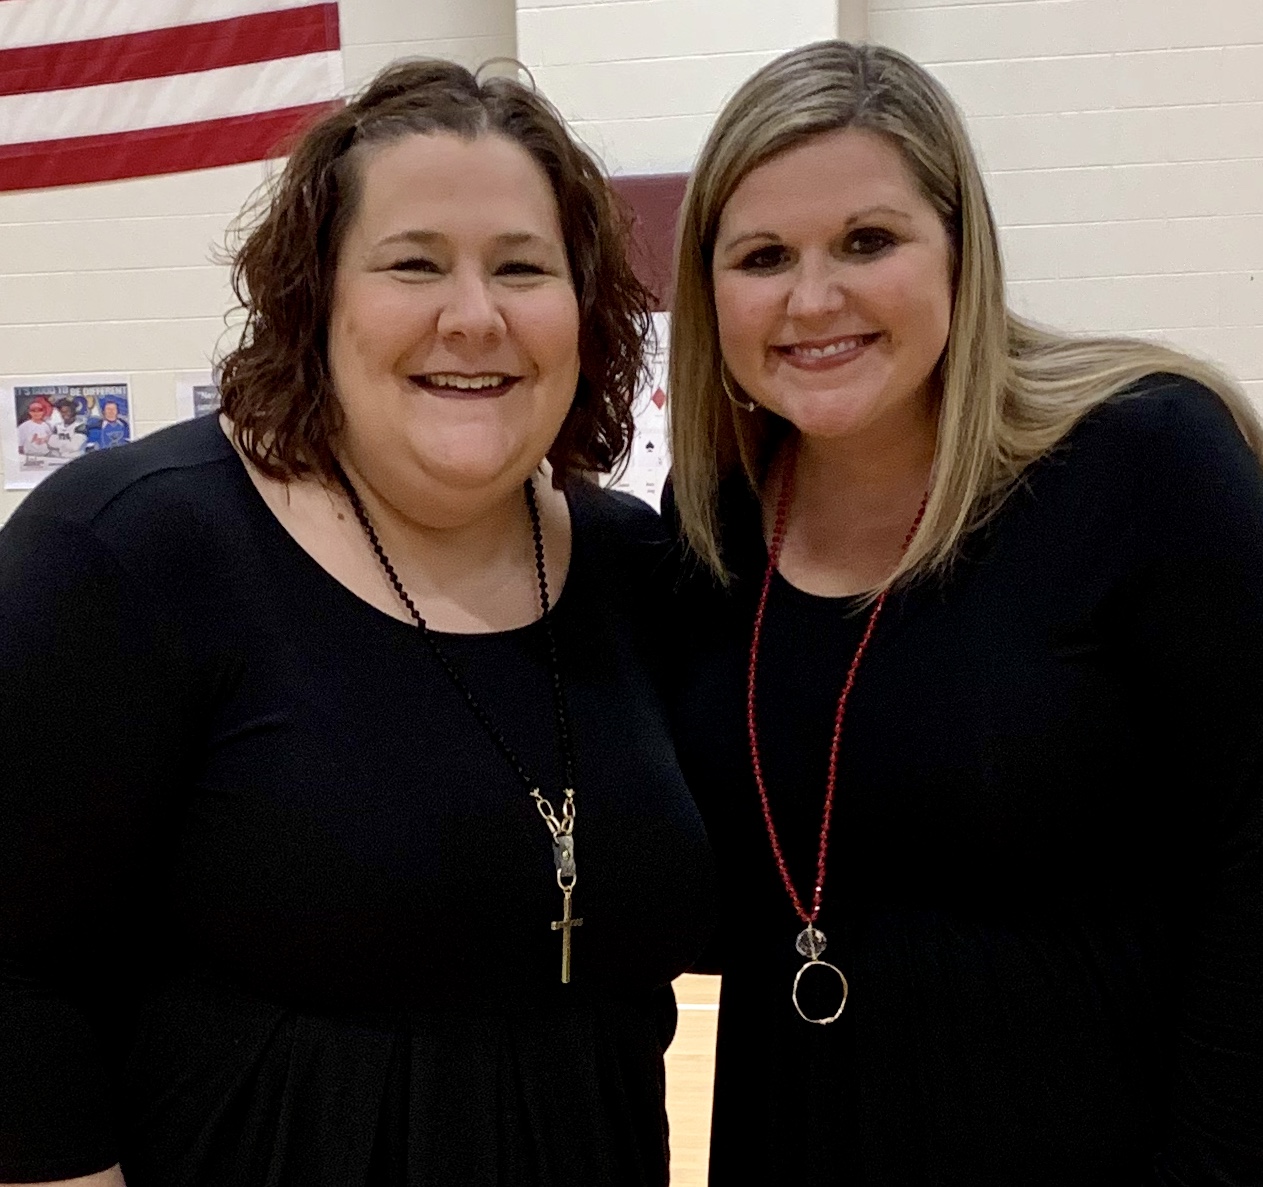 Mrs. McCluskey and Mrs. Brown, sponsors